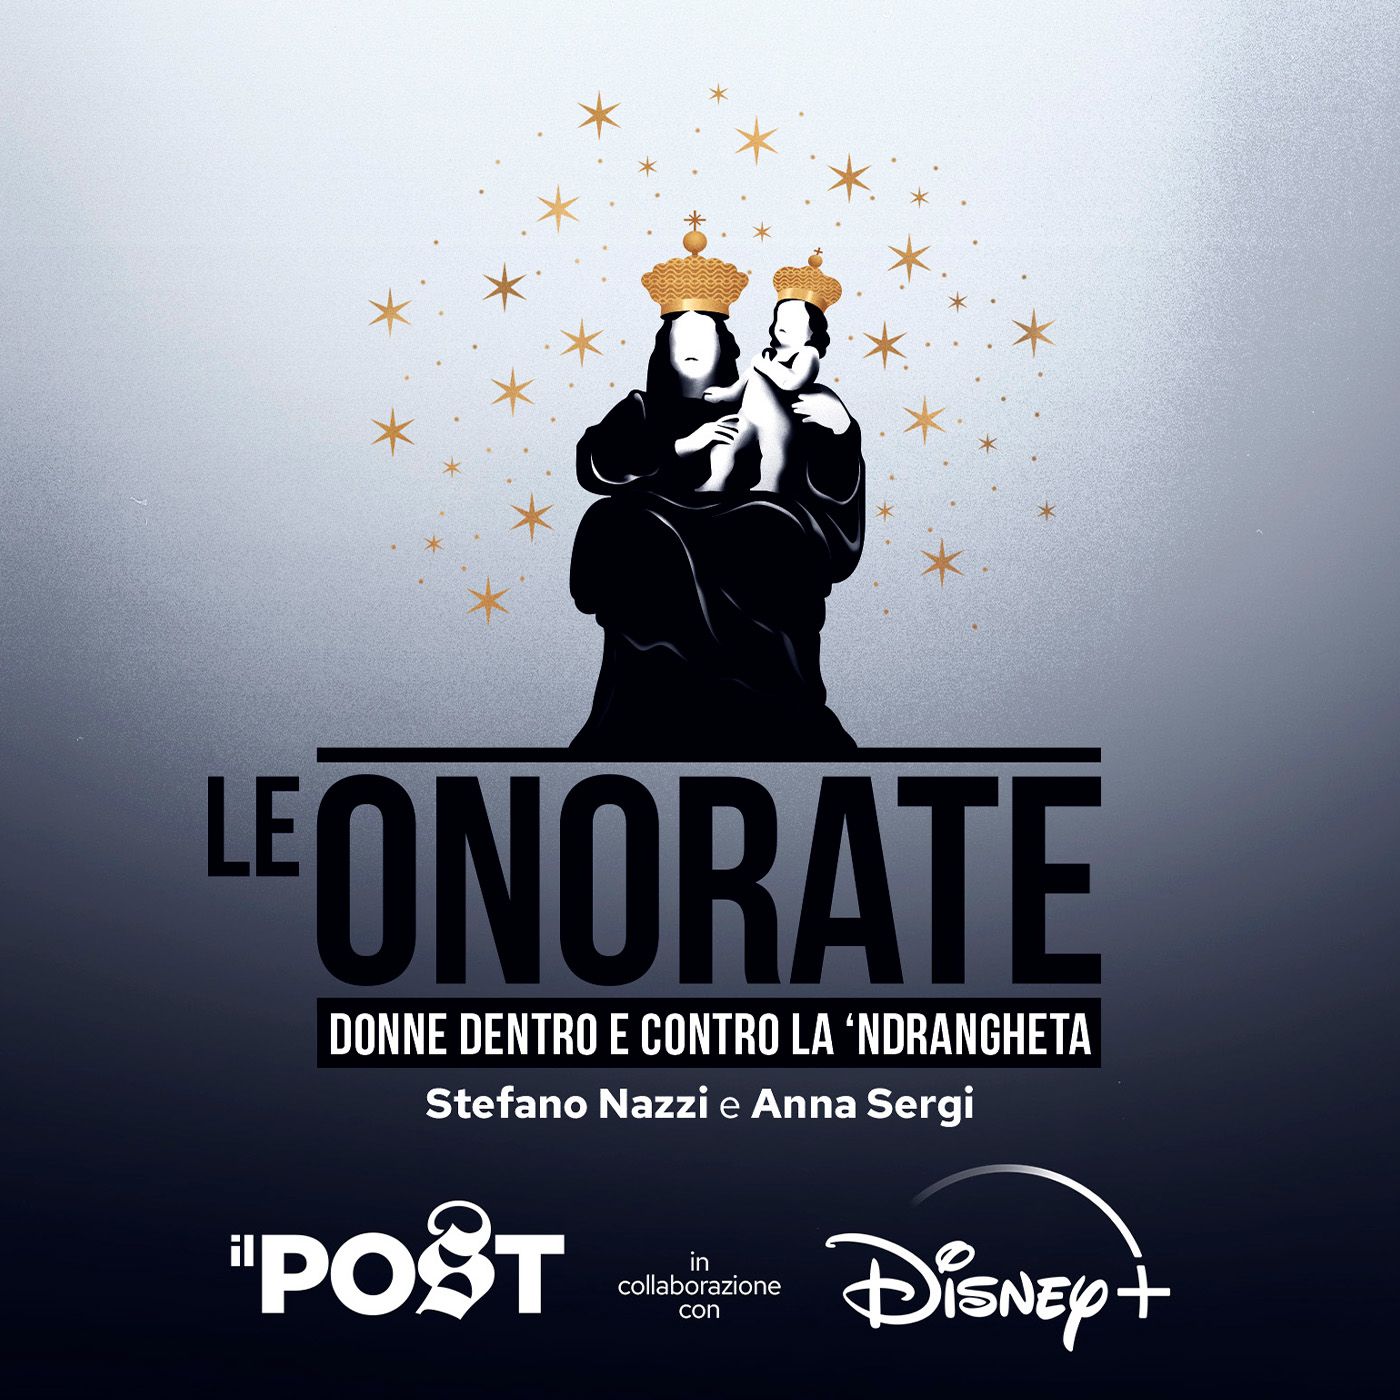 Le onorate